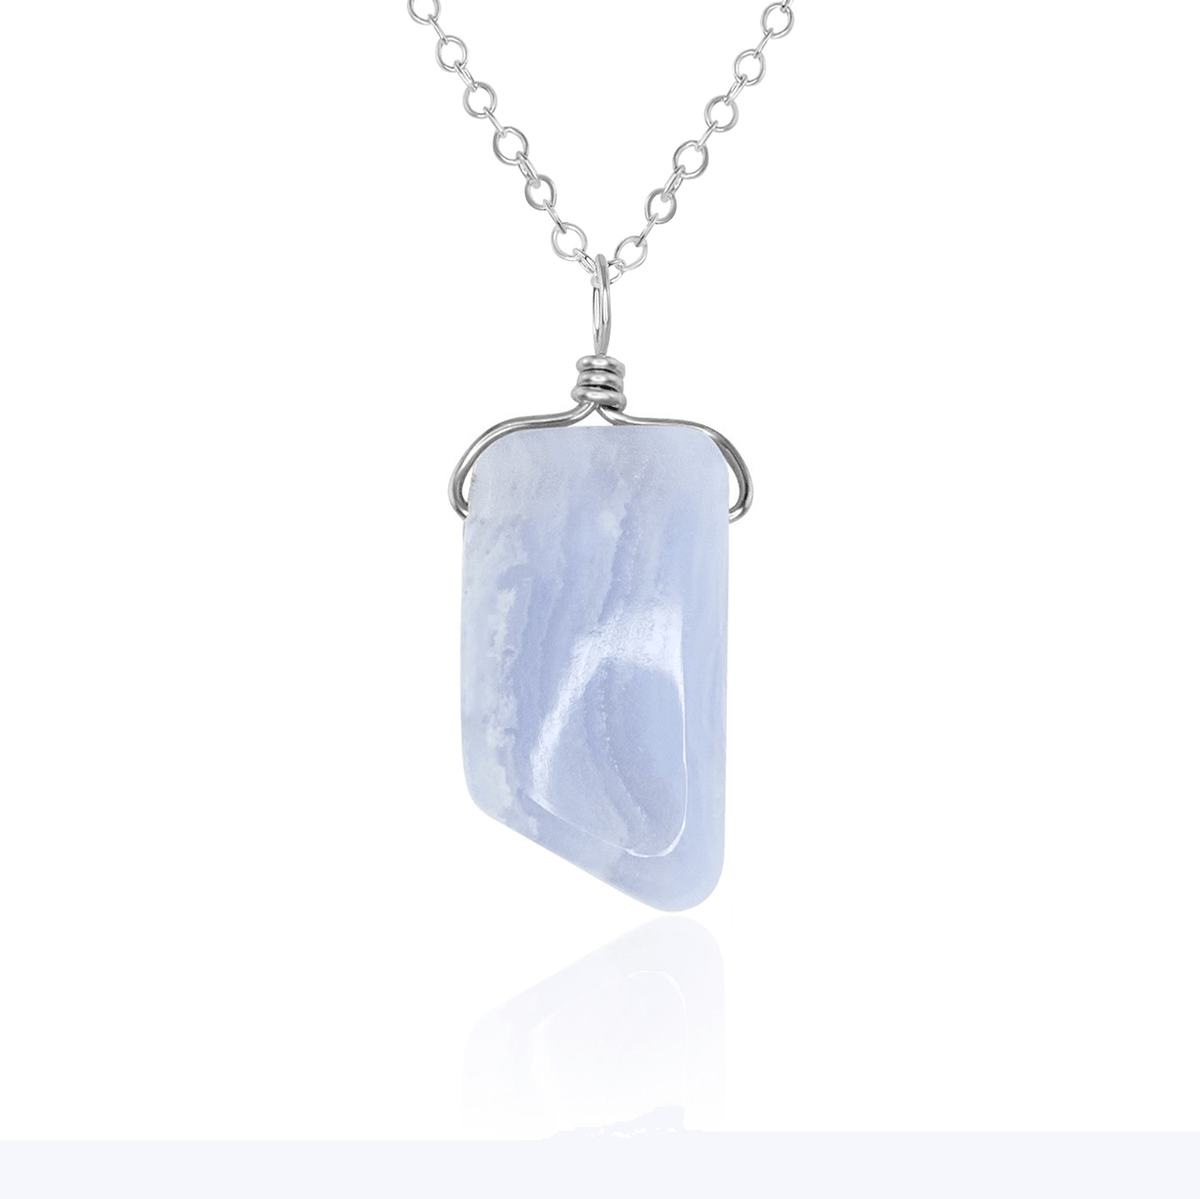 Small Smooth Blue Lace Agate Gentle Point Crystal Pendant Necklace - Small Smooth Blue Lace Agate Gentle Point Crystal Pendant Necklace - Sterling Silver / Cable - Luna Tide Handmade Crystal Jewellery